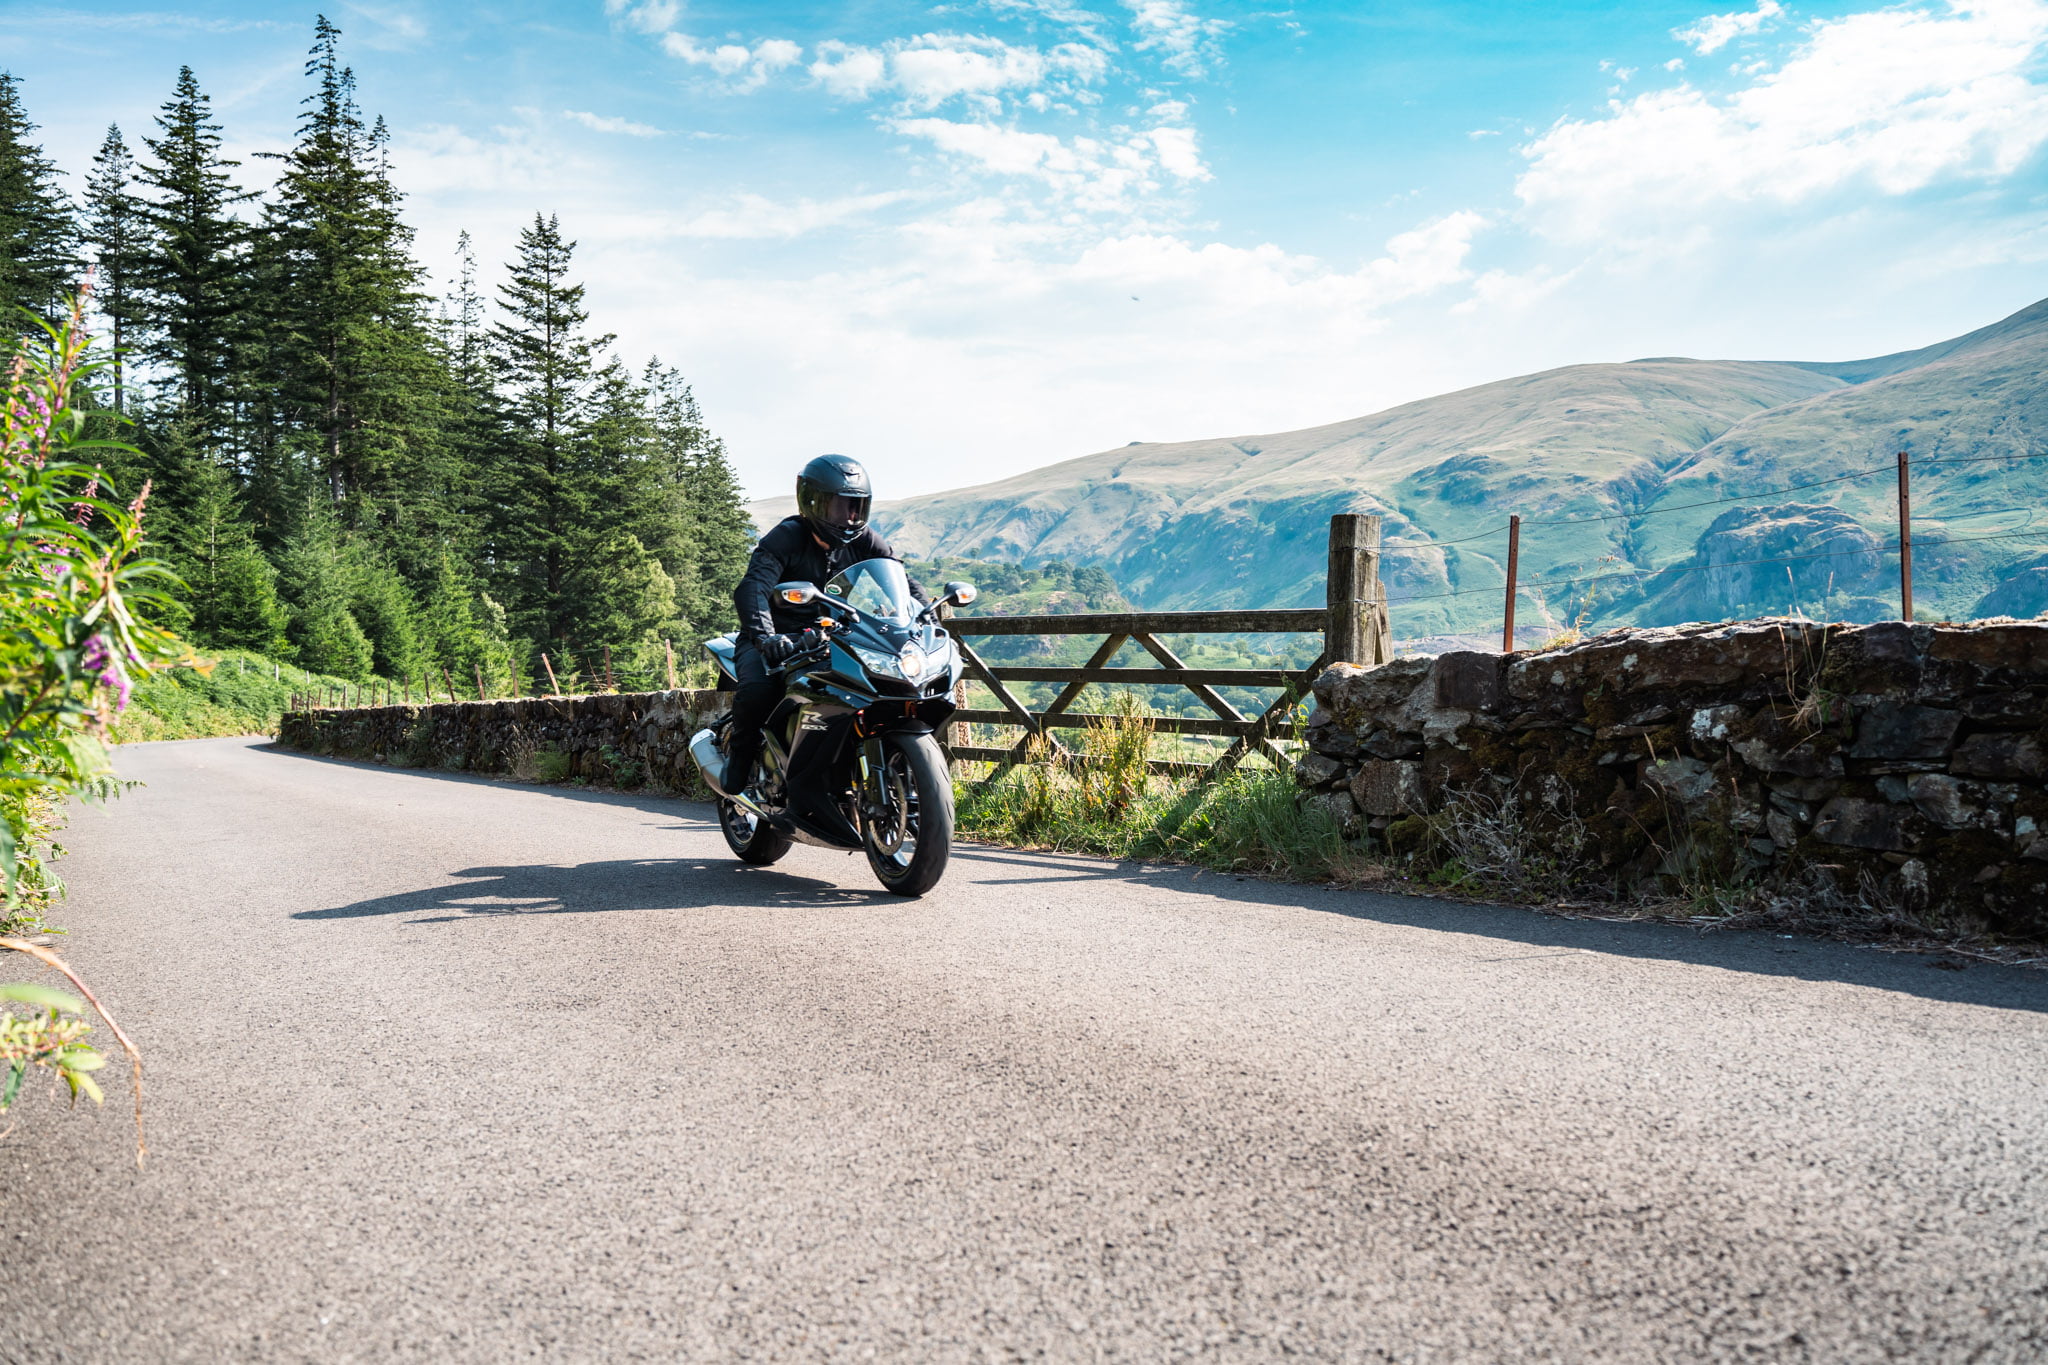 The best motorcycle gear for hot weather